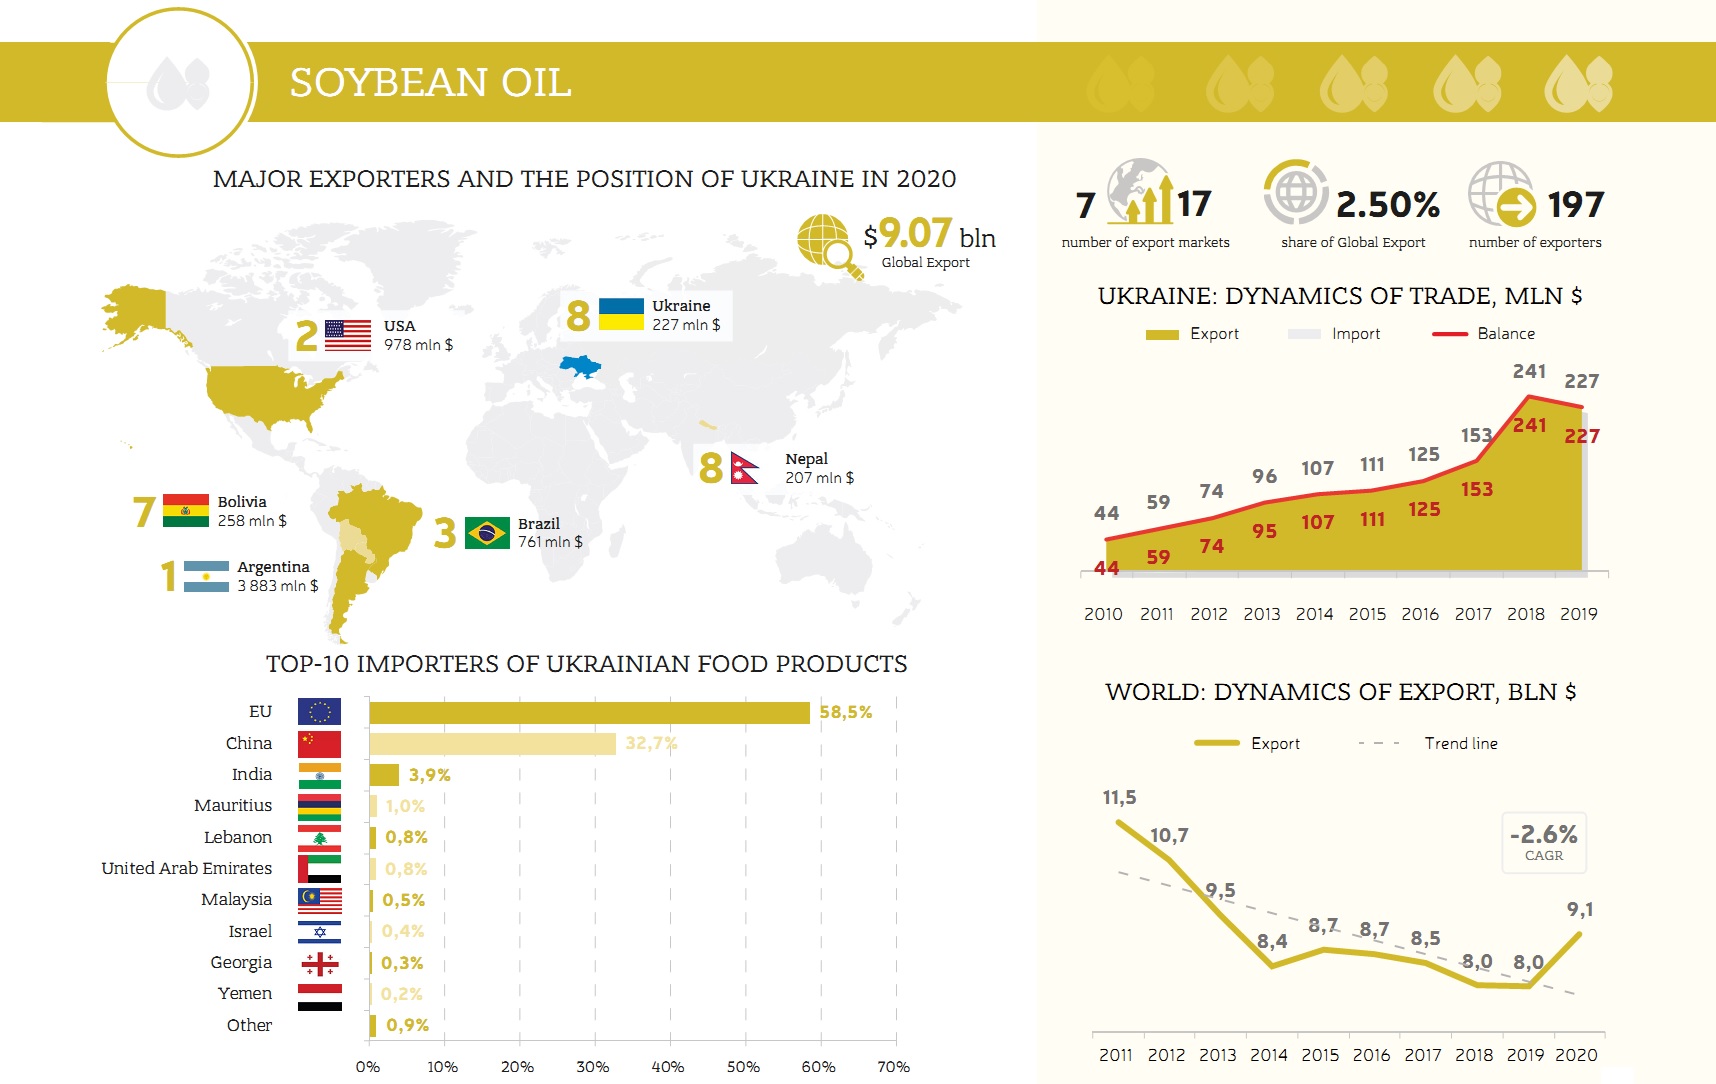 The world soybean oil market and Ukraine's place in it (click for higher resolution). Source: UBTA